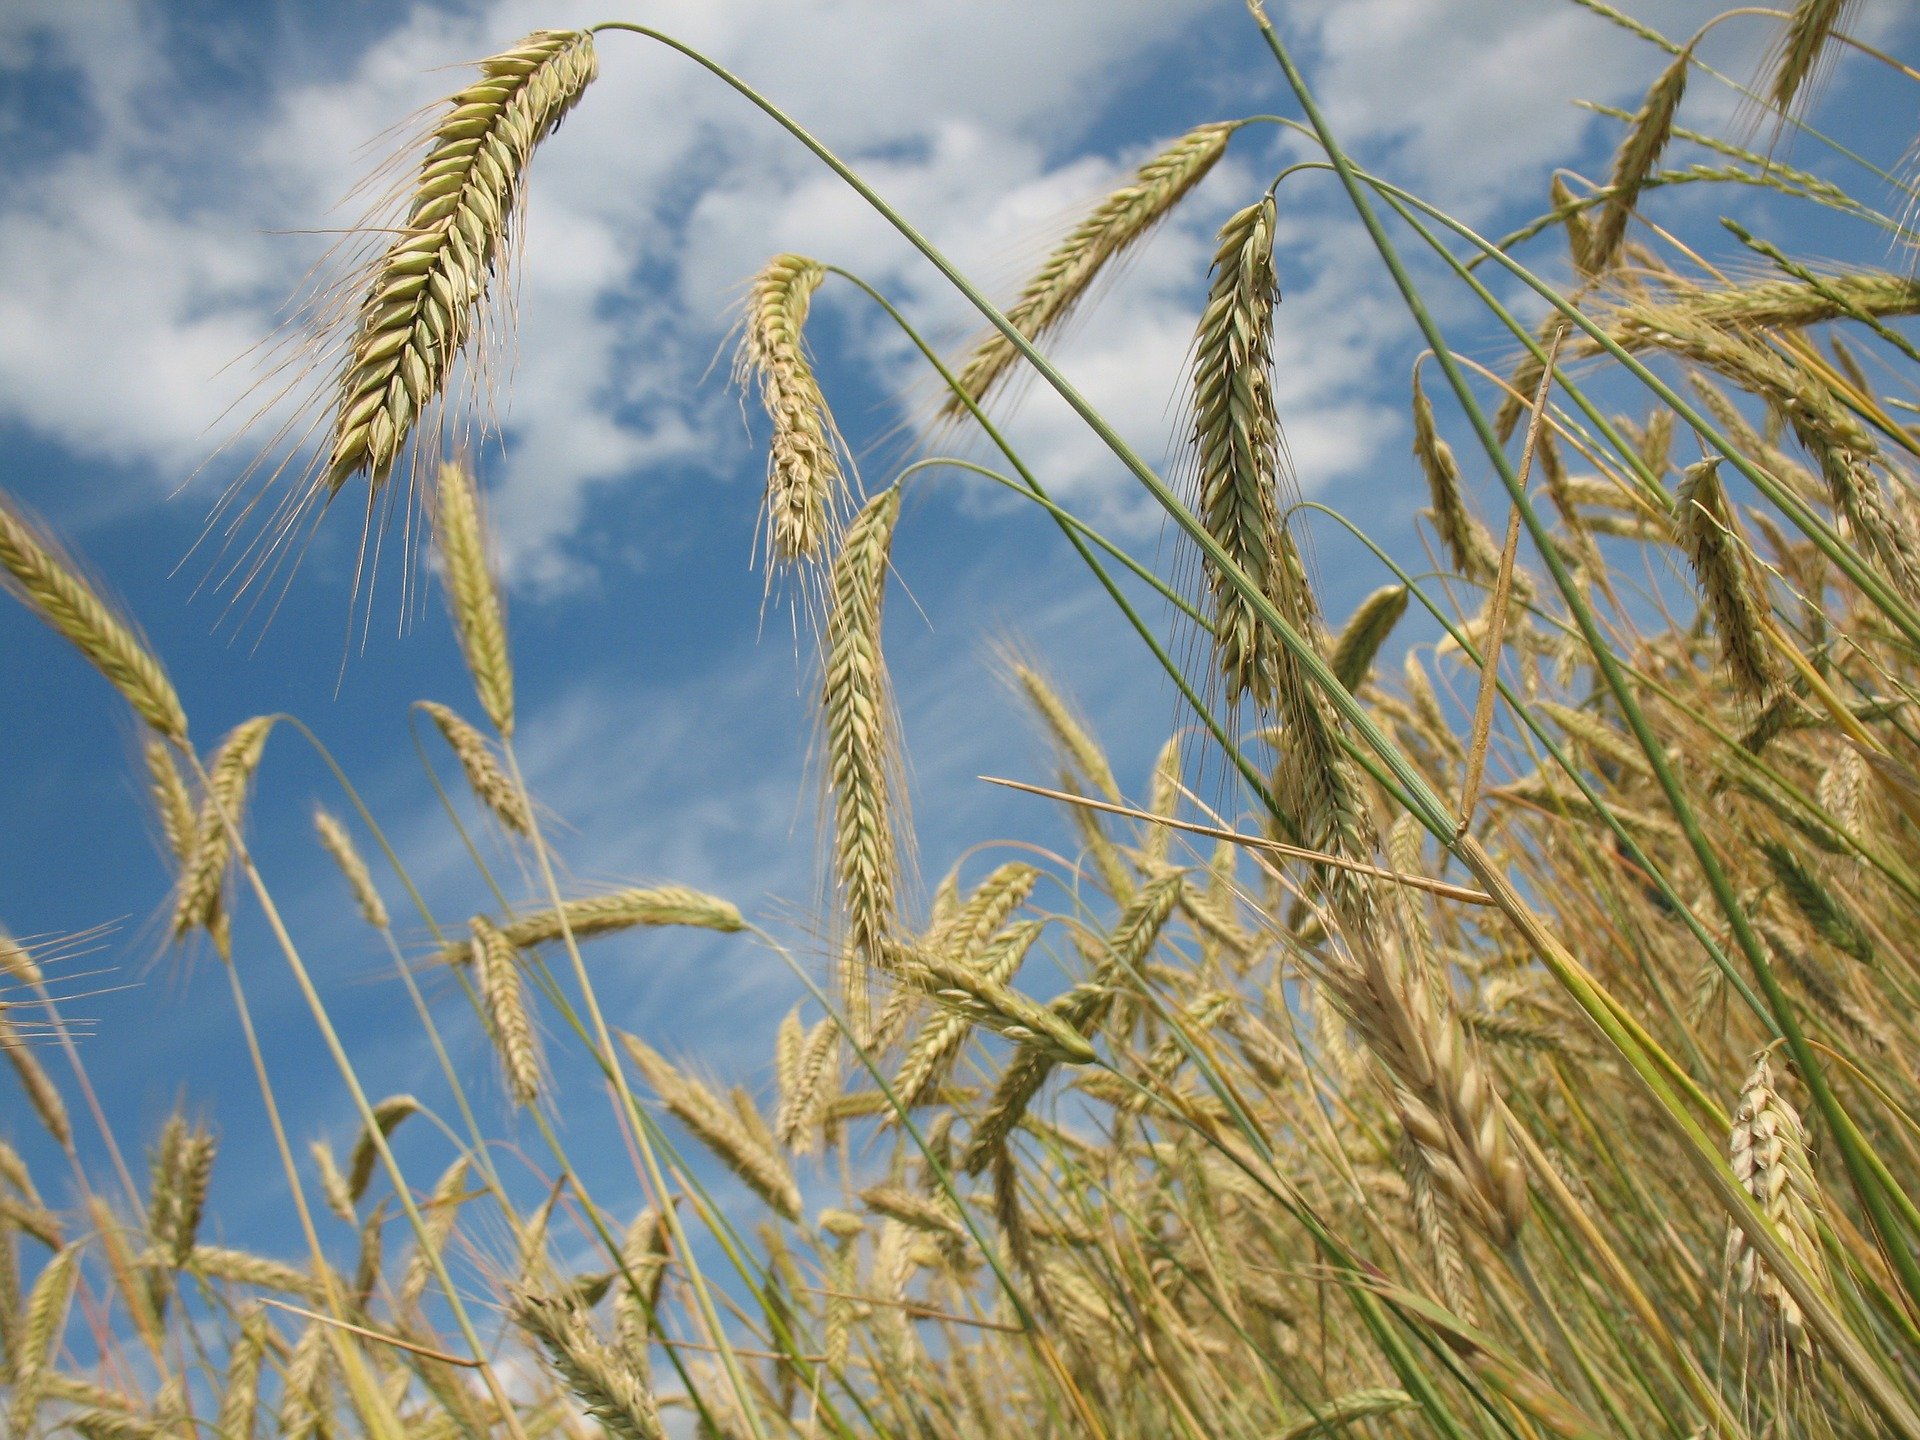 Sowing wheat earlier can help increase yields in India